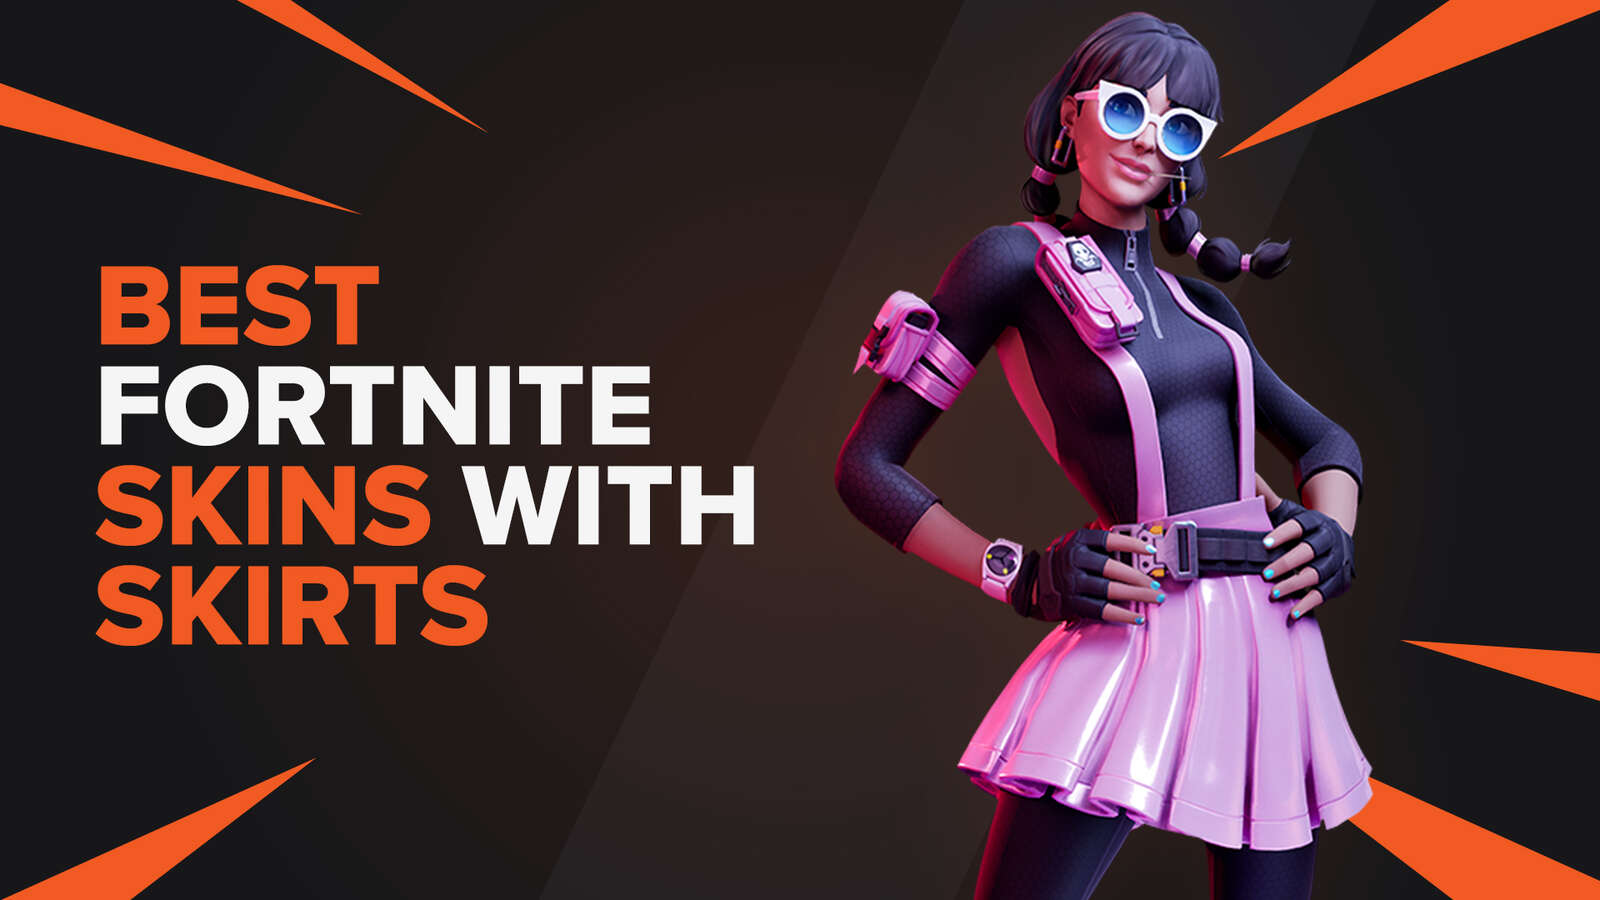 The Best Fortnite Skins with Skirts